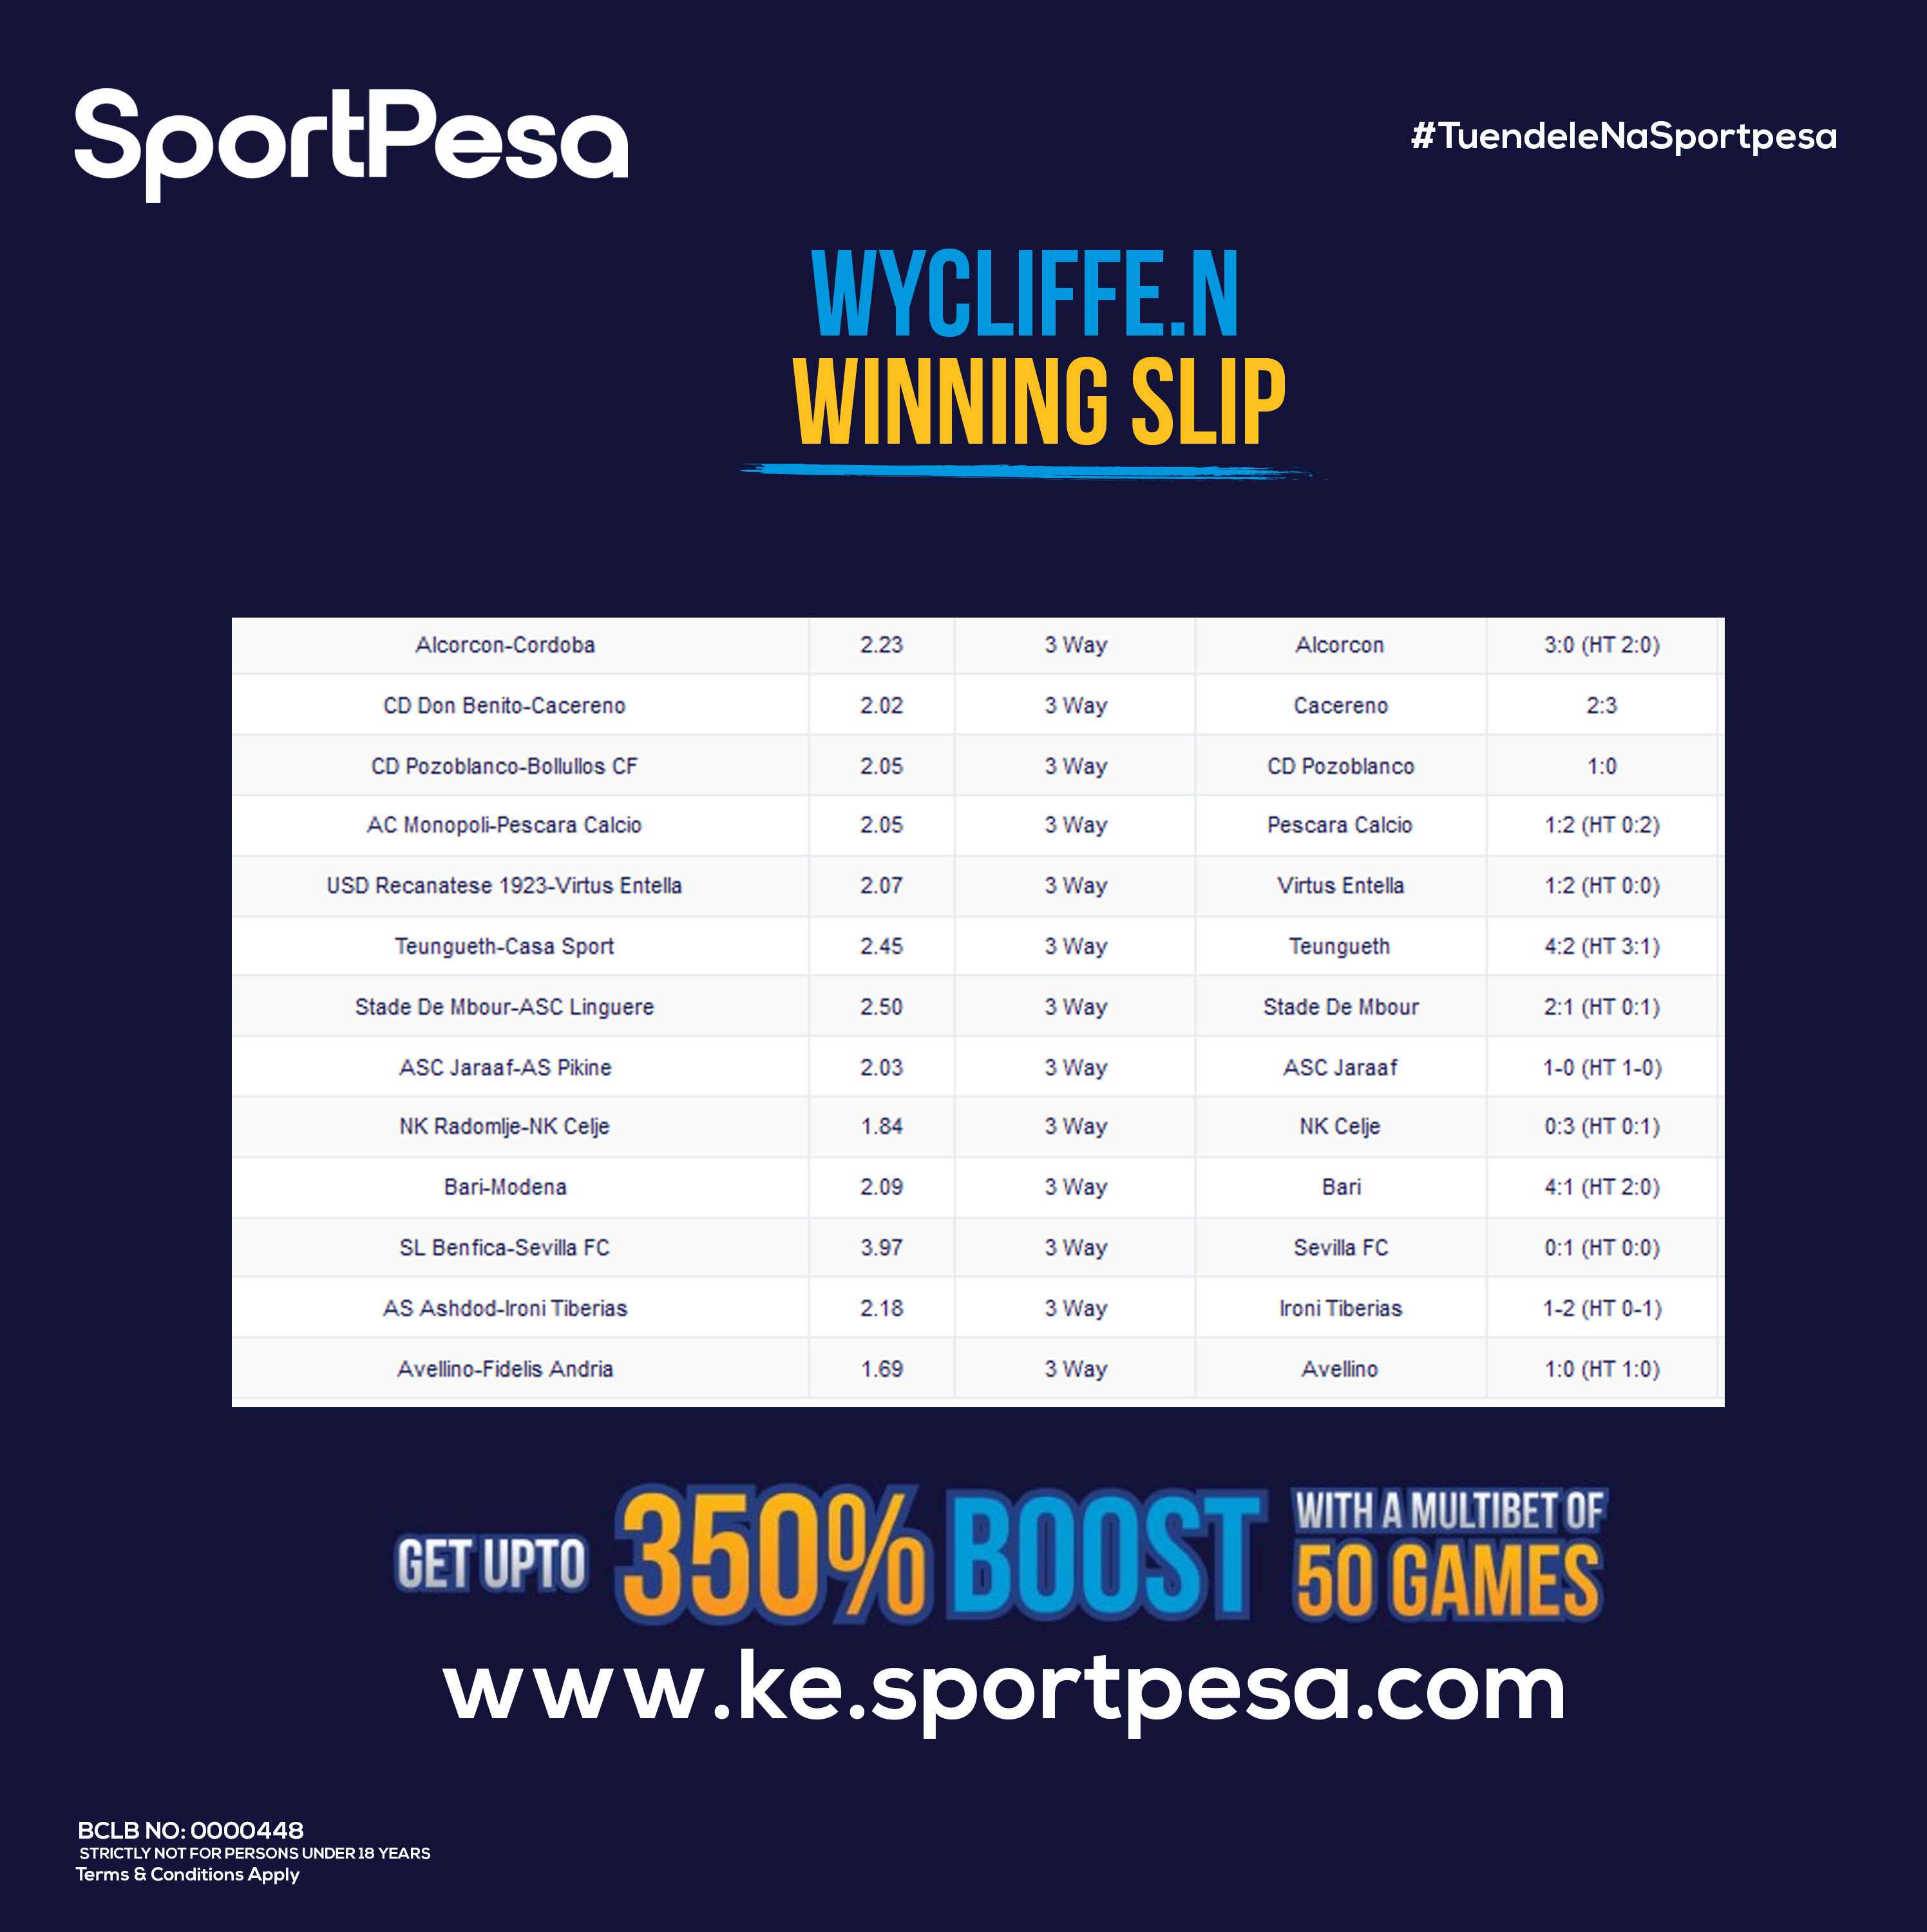 SportPesa Care - 🚀How HIGH can you fly on SPACEMAN👩‍🚀